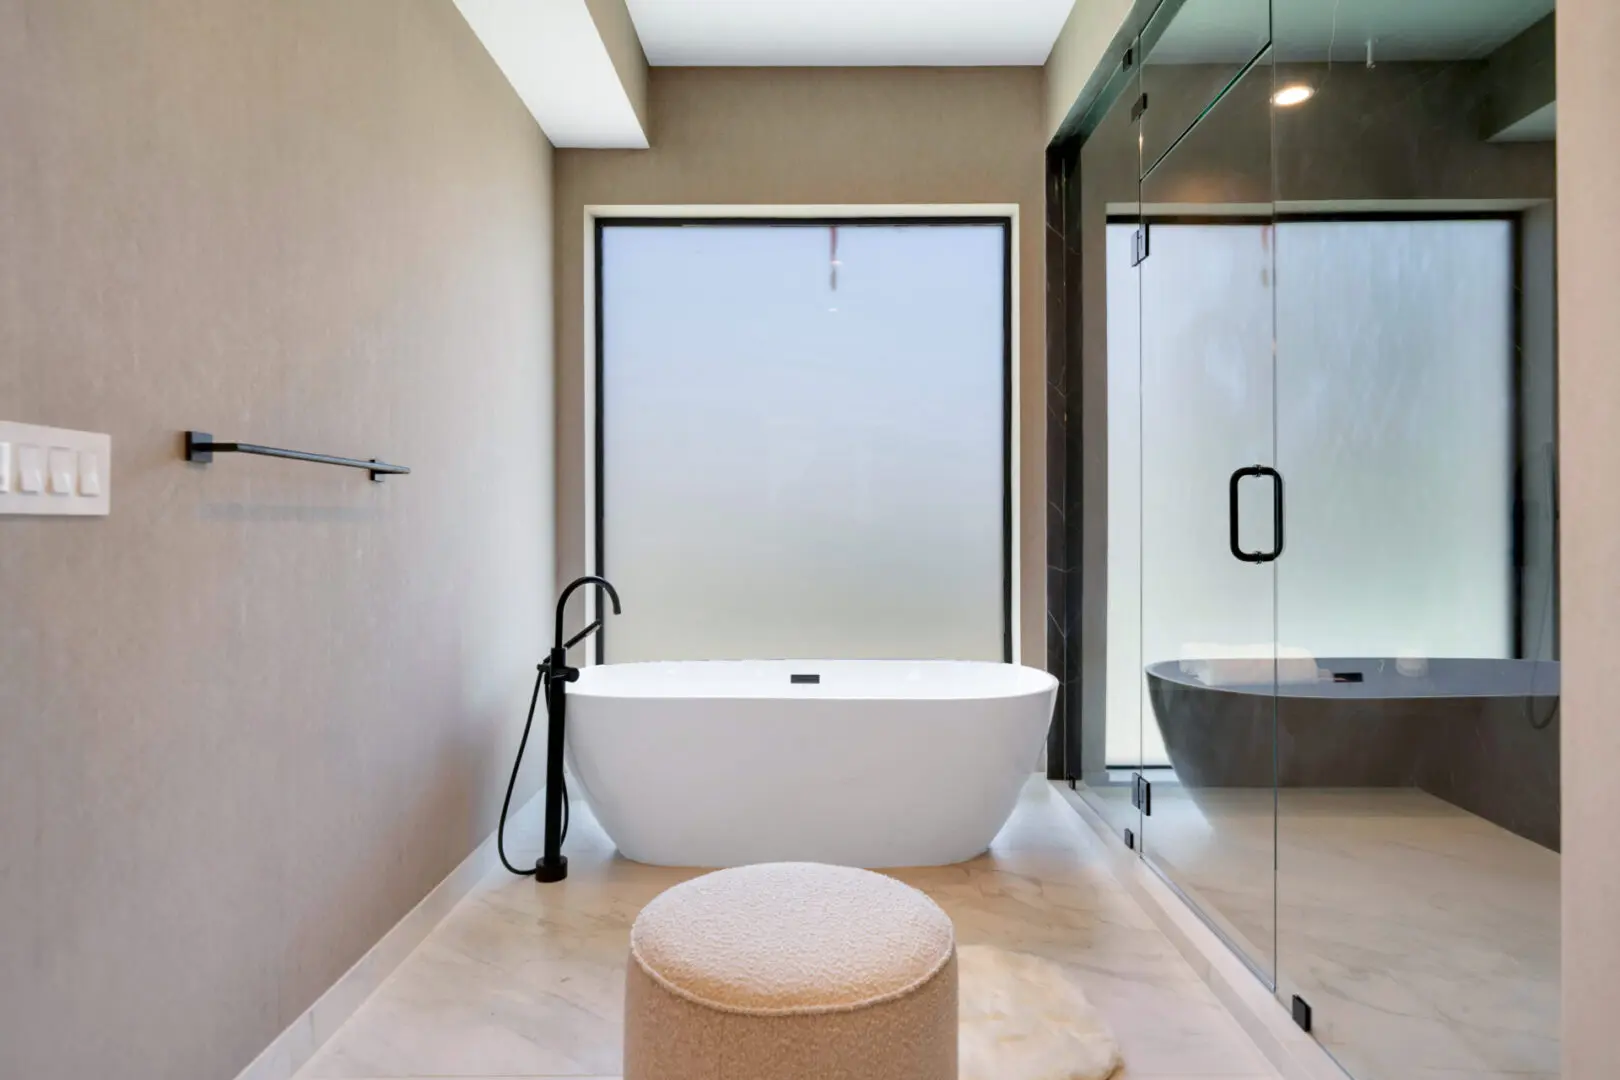 A bath tub and the matte black colored shower fixture